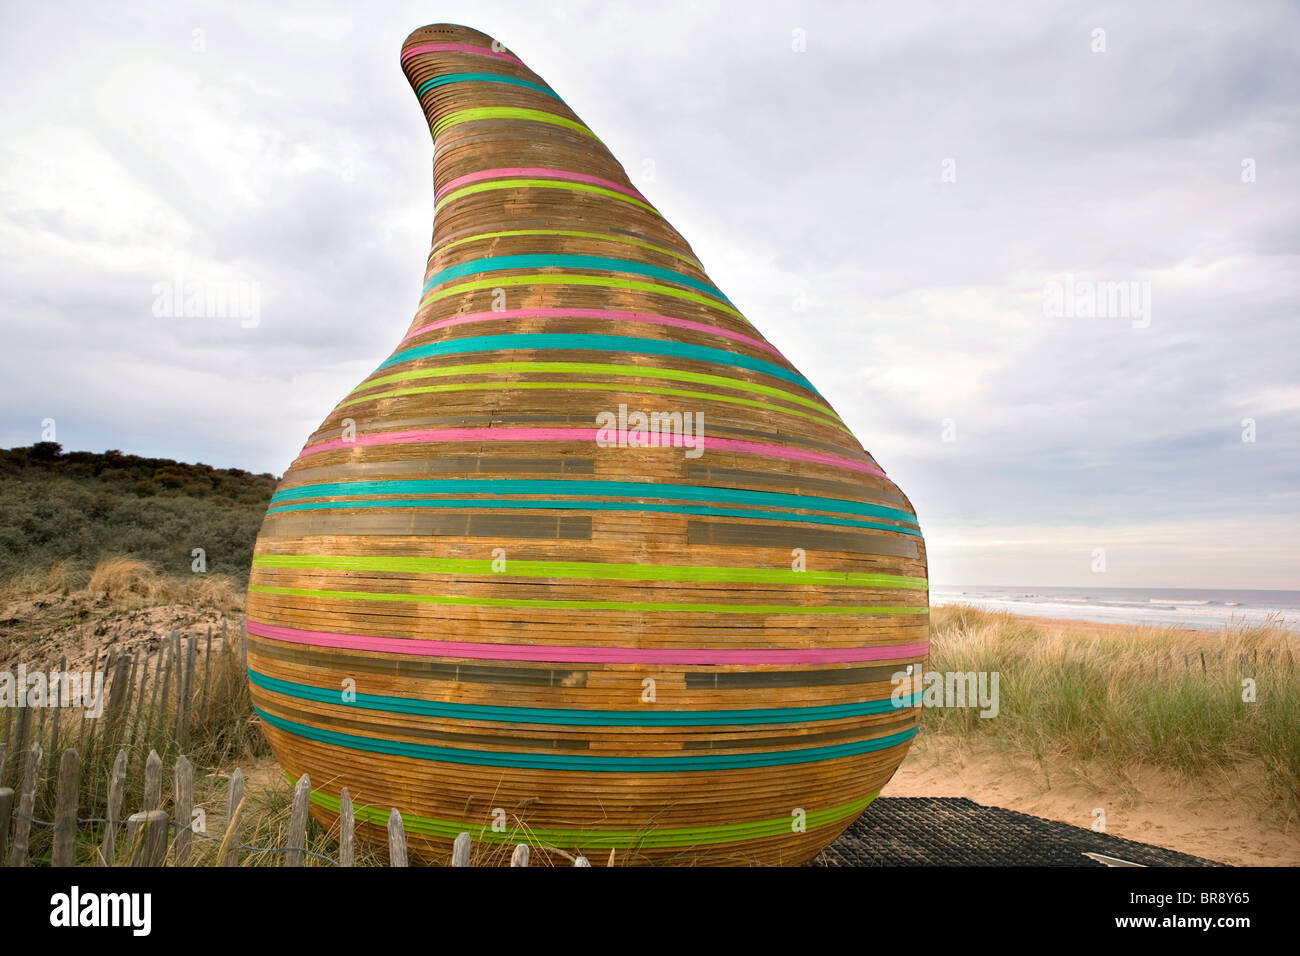 Jabba the hut. Mablethorpe. Inghilterra Foto Stock